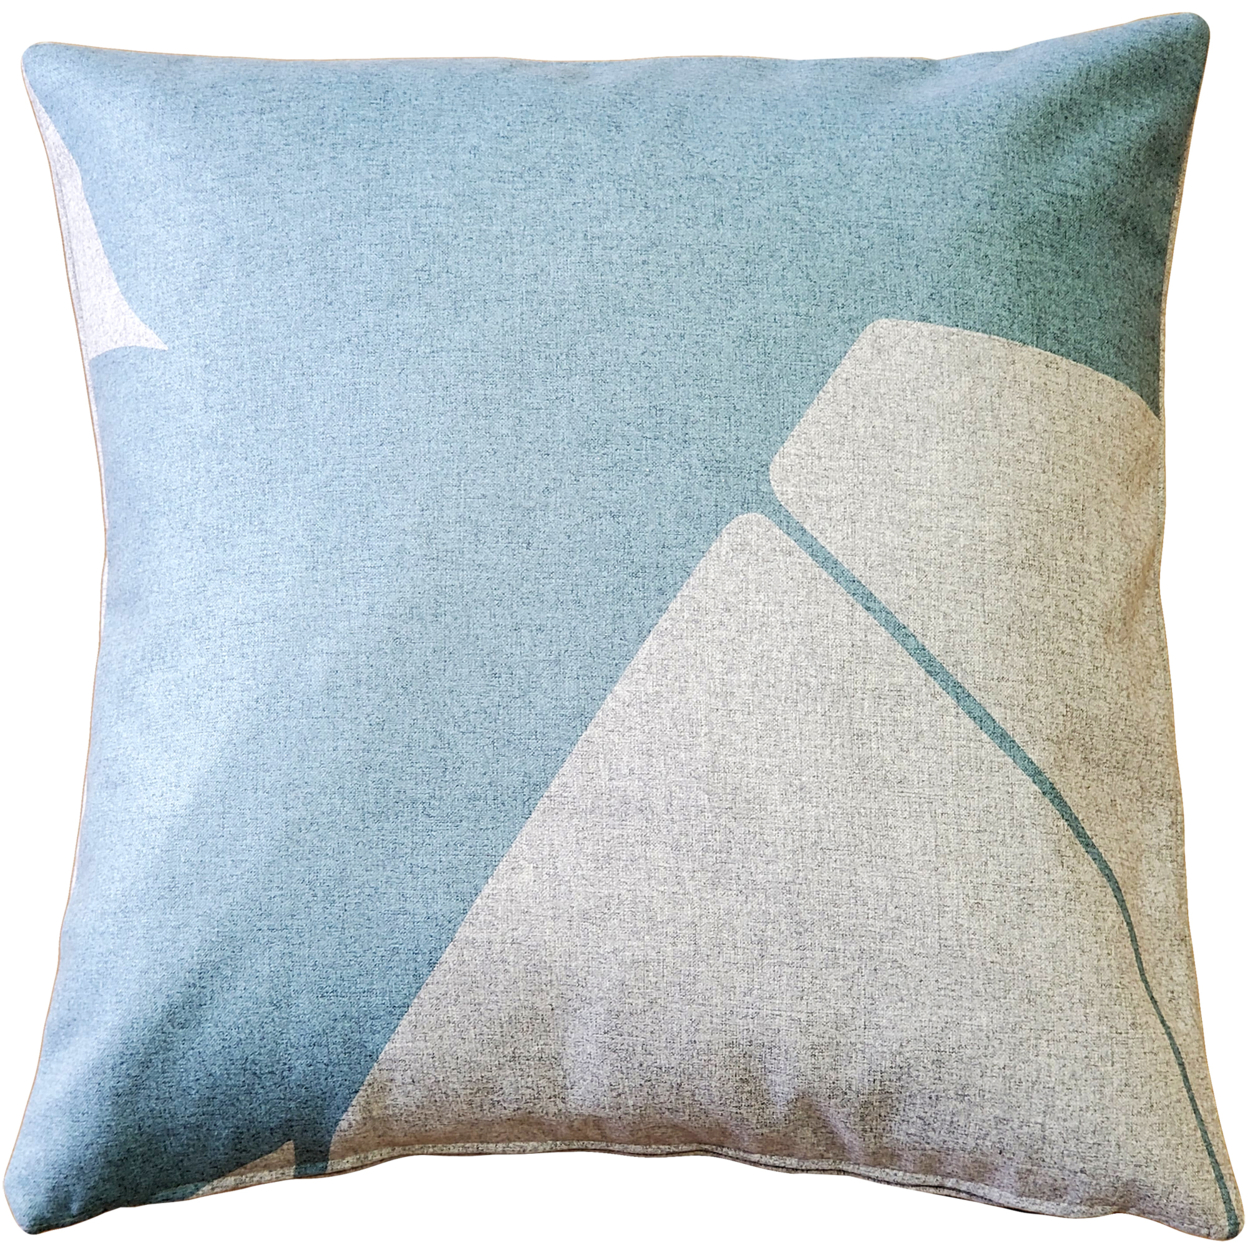 Boketto Paradiso Blue Throw Pillow 19x19 Inches Square, Complete Pillow with Polyfill Pillow Insert